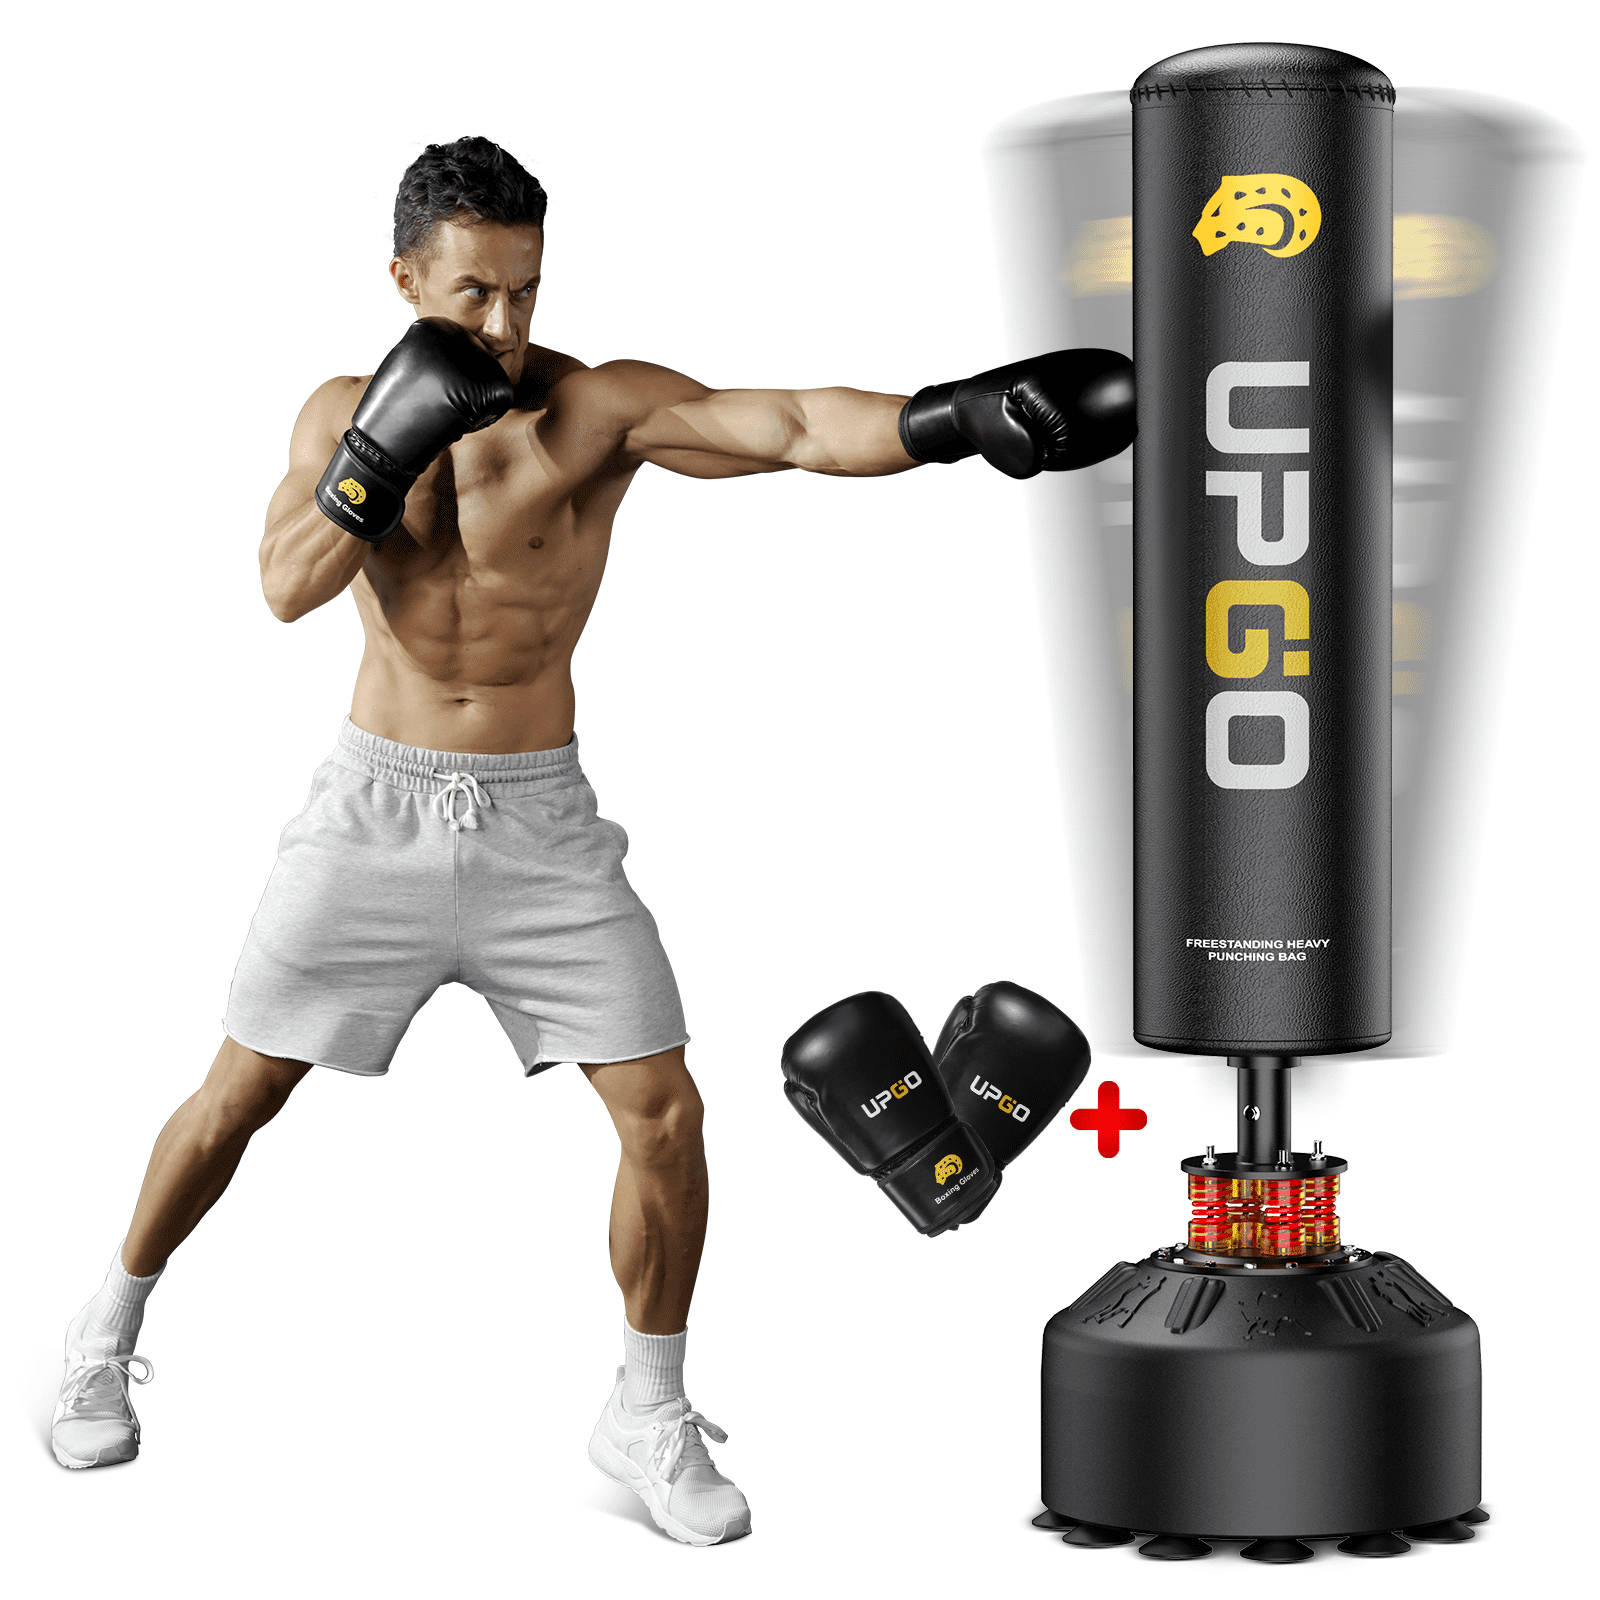 Uking Adult Free Standing Boxing Punch Bag，MMA Boxing Partner Boxing Trainer Heavy Duty Punching Bag with Suction Cup Training Dummy Martial Arts Kick Punch Boxing 